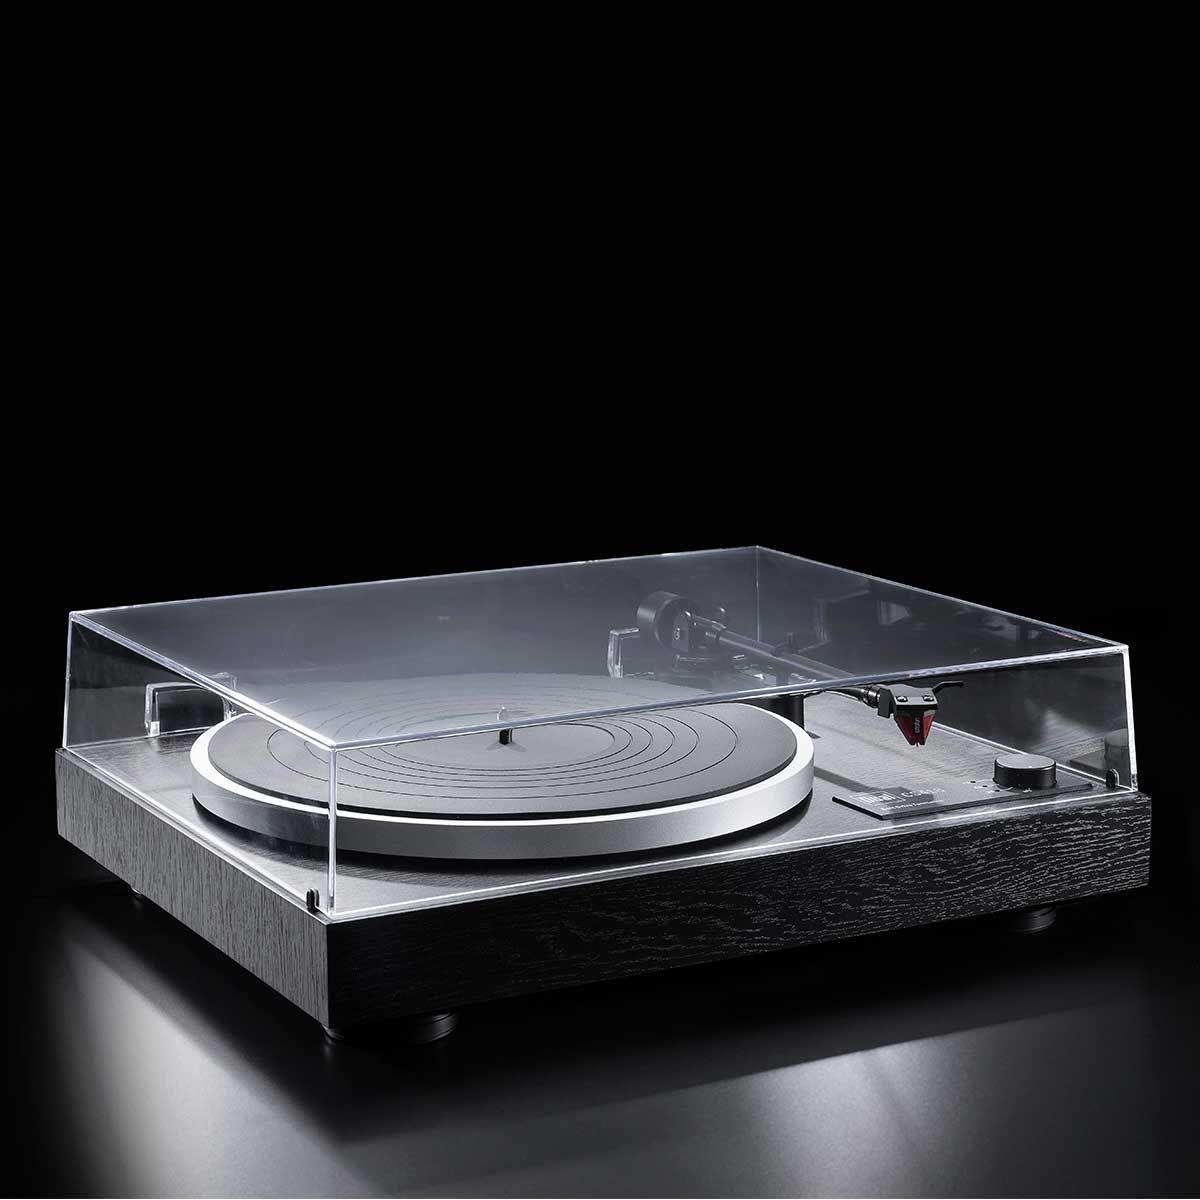 Dual CS418 Manual Turntable, Black Vinyl, front angle with dustcover closed